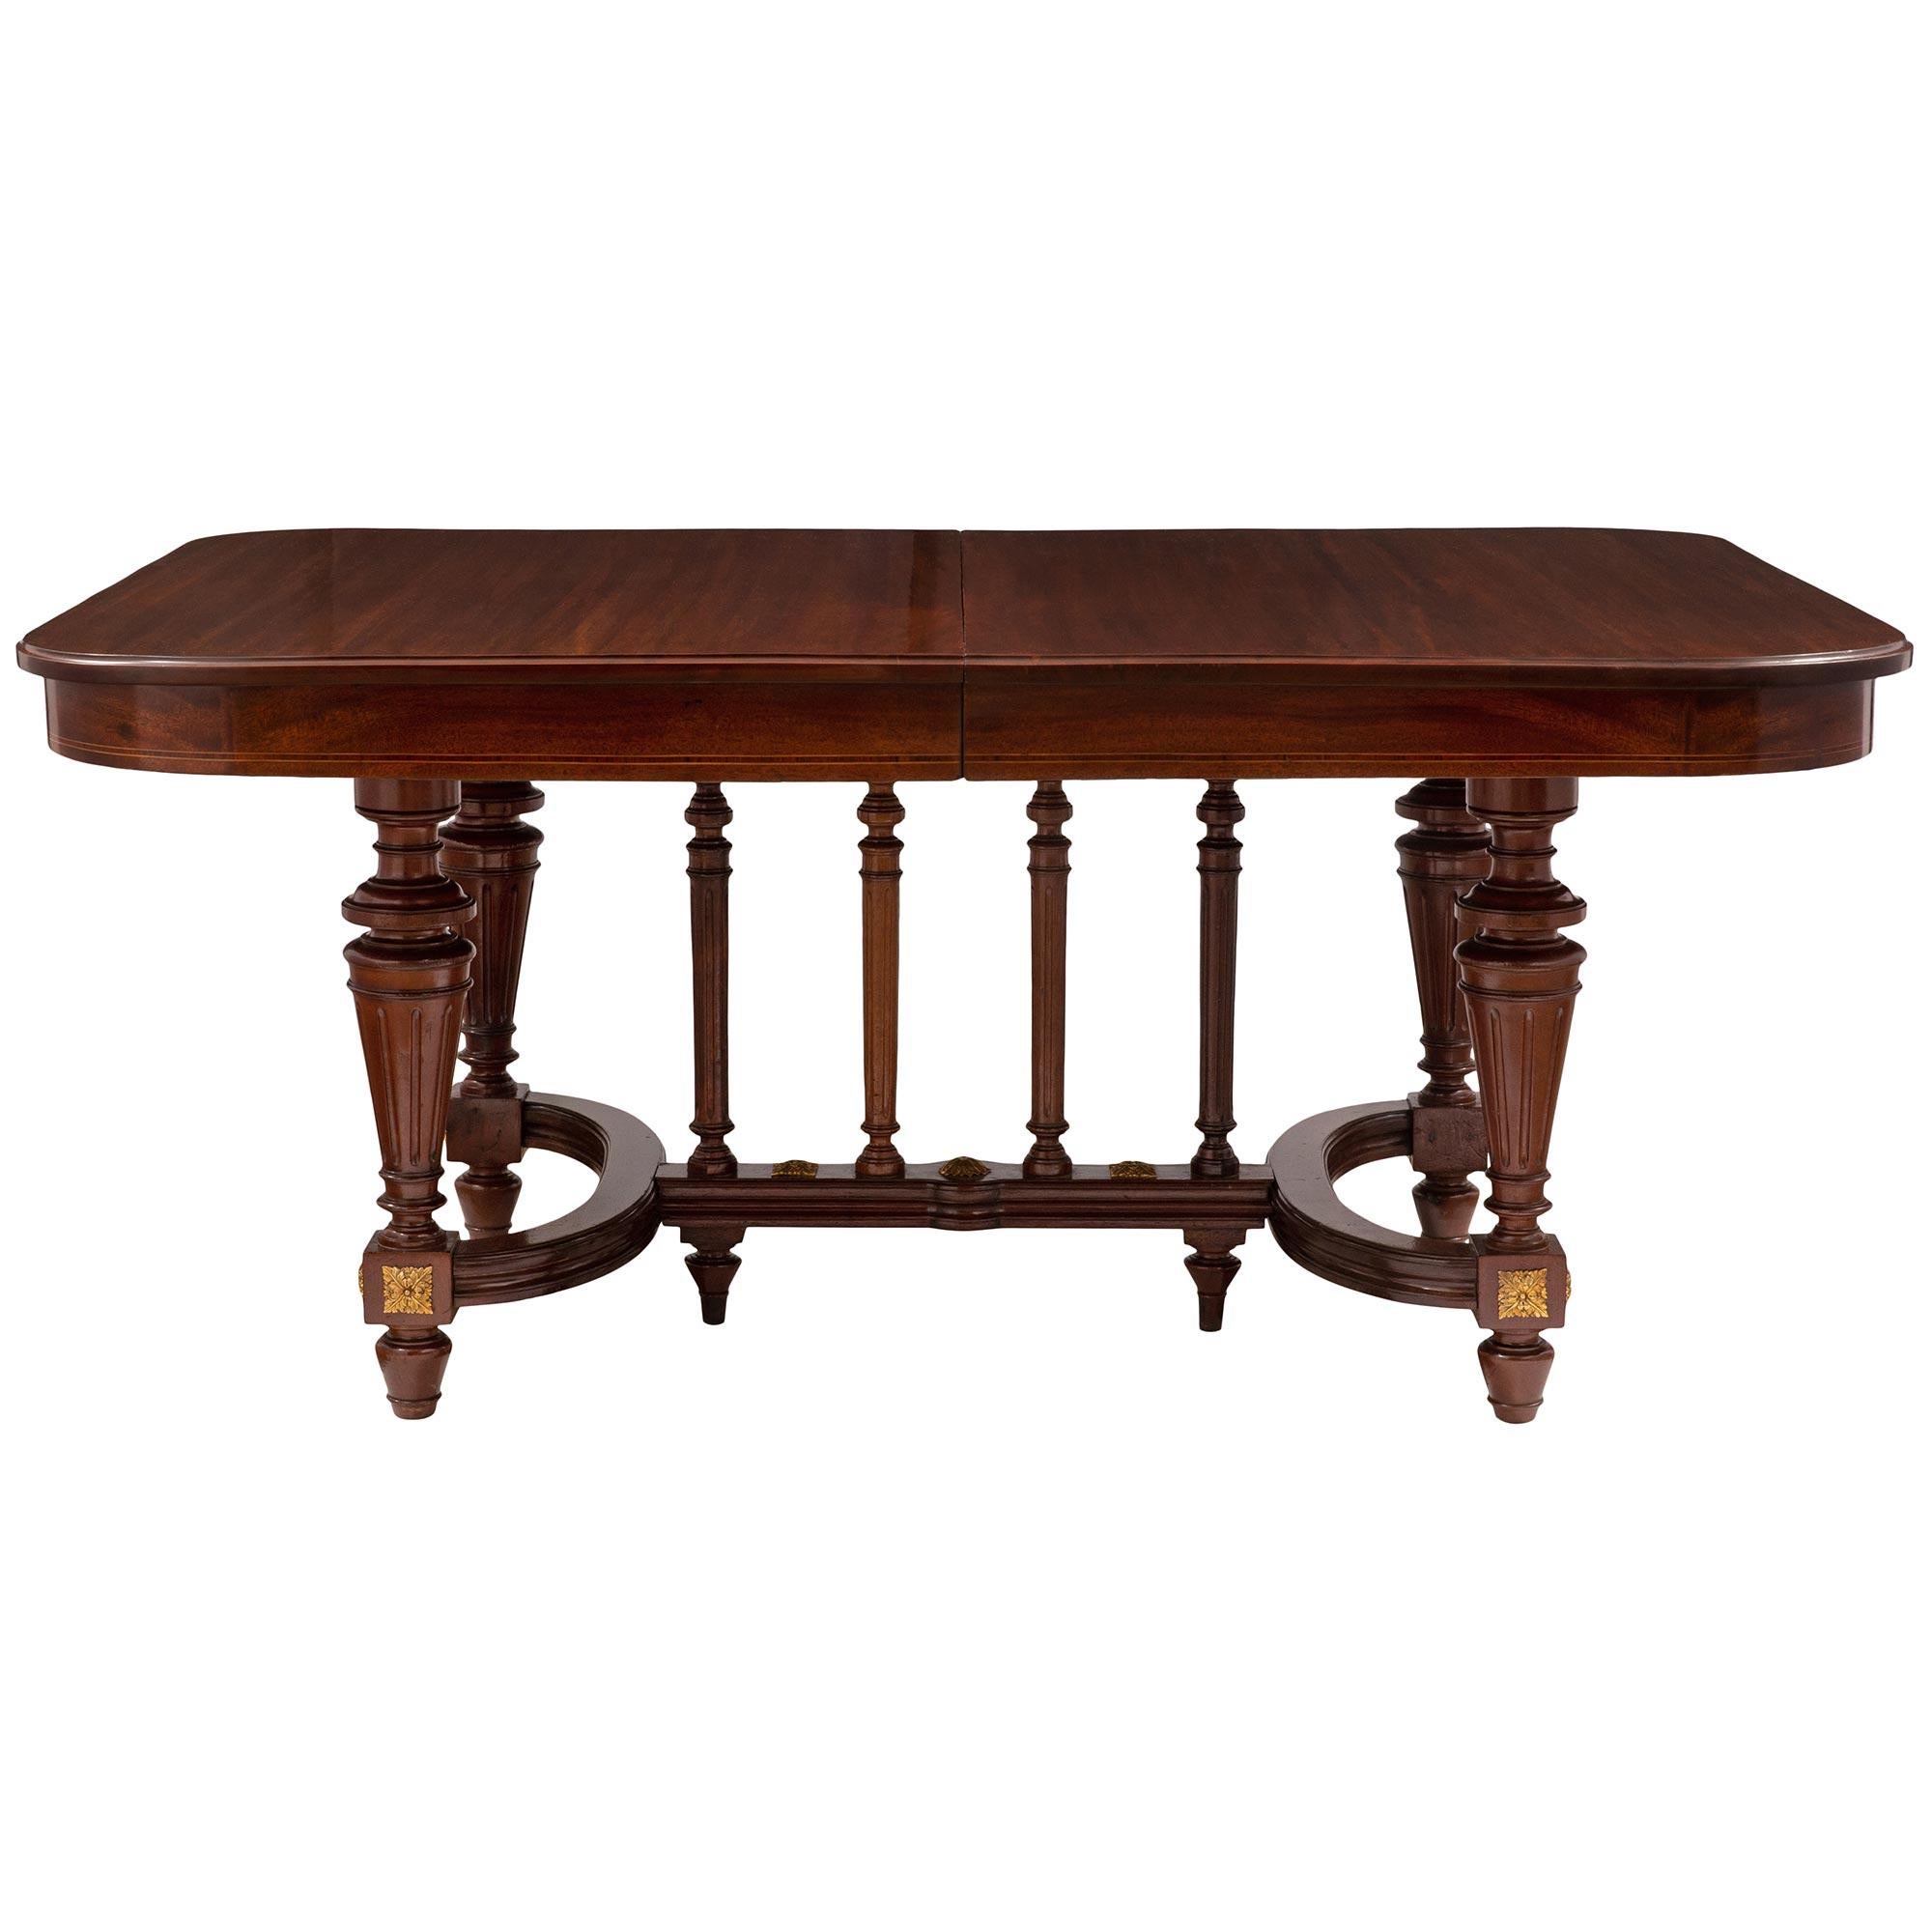 French 19th Century Louis XVI Style Mahogany Dining Table with Two Extensions In Good Condition For Sale In West Palm Beach, FL